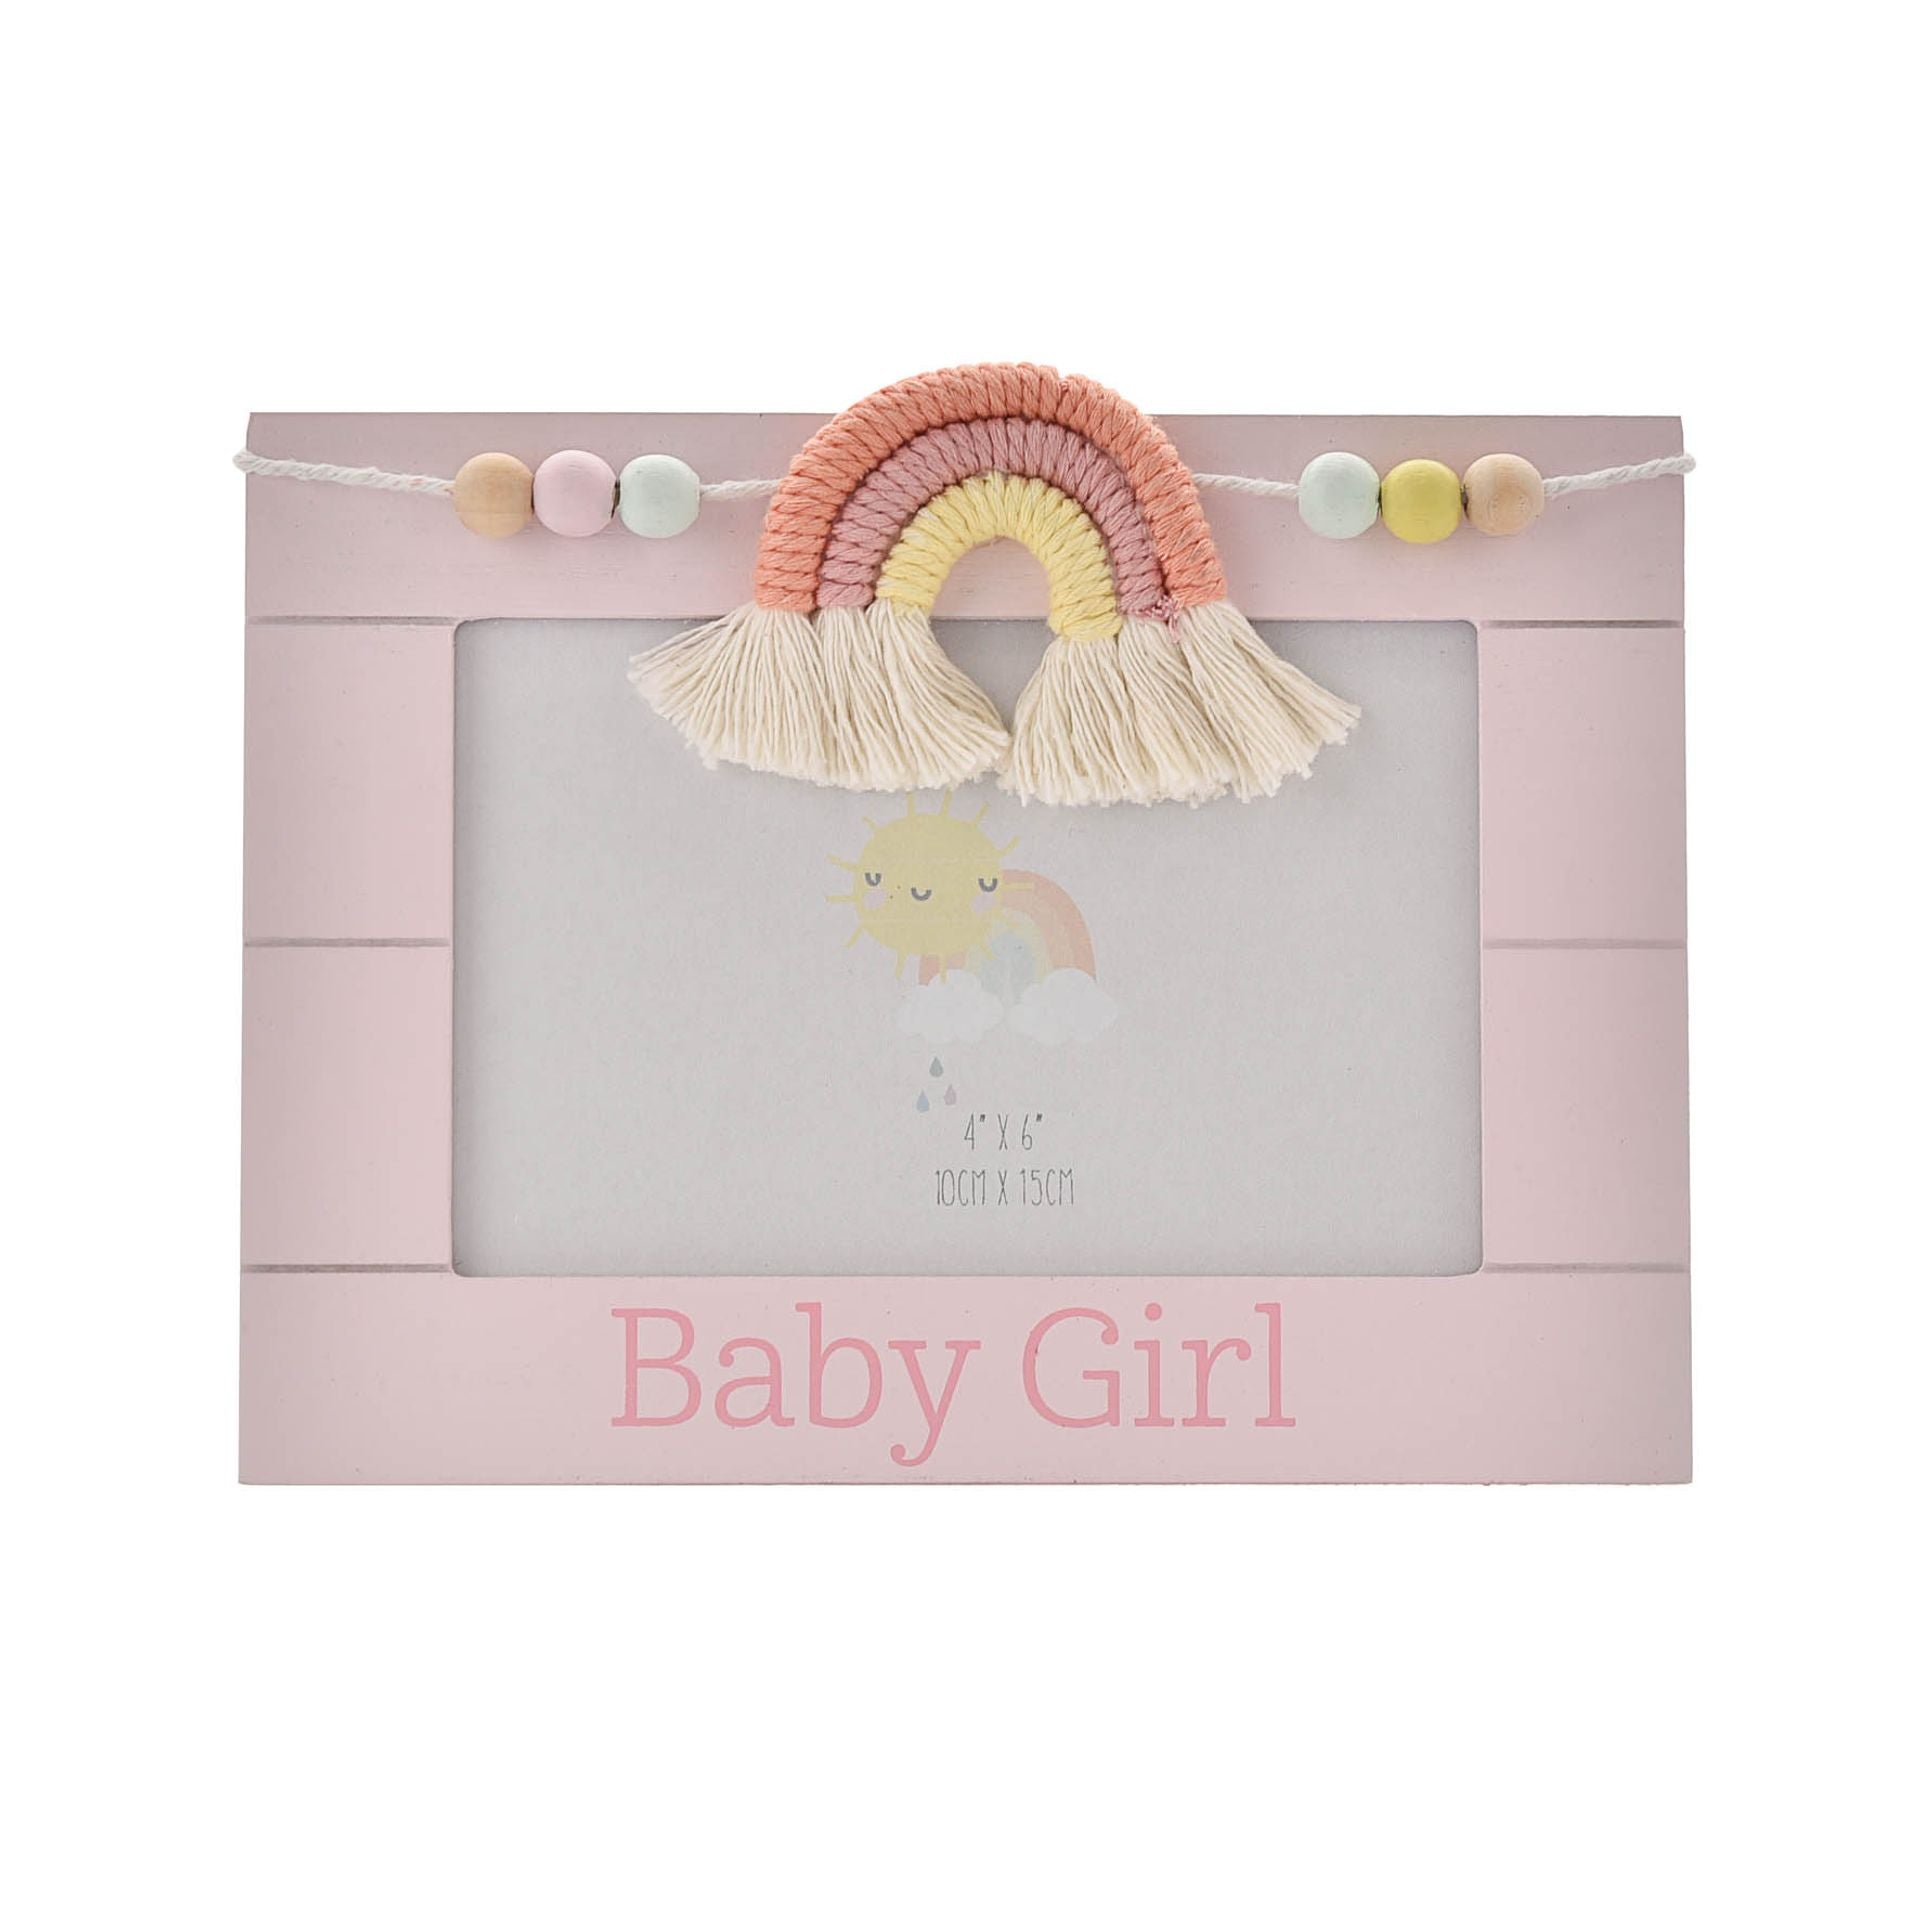 Free standing wooden photo picture frame in pink with a macrame rainbow and &#39;Baby Girl&#39; Sentiment wording 